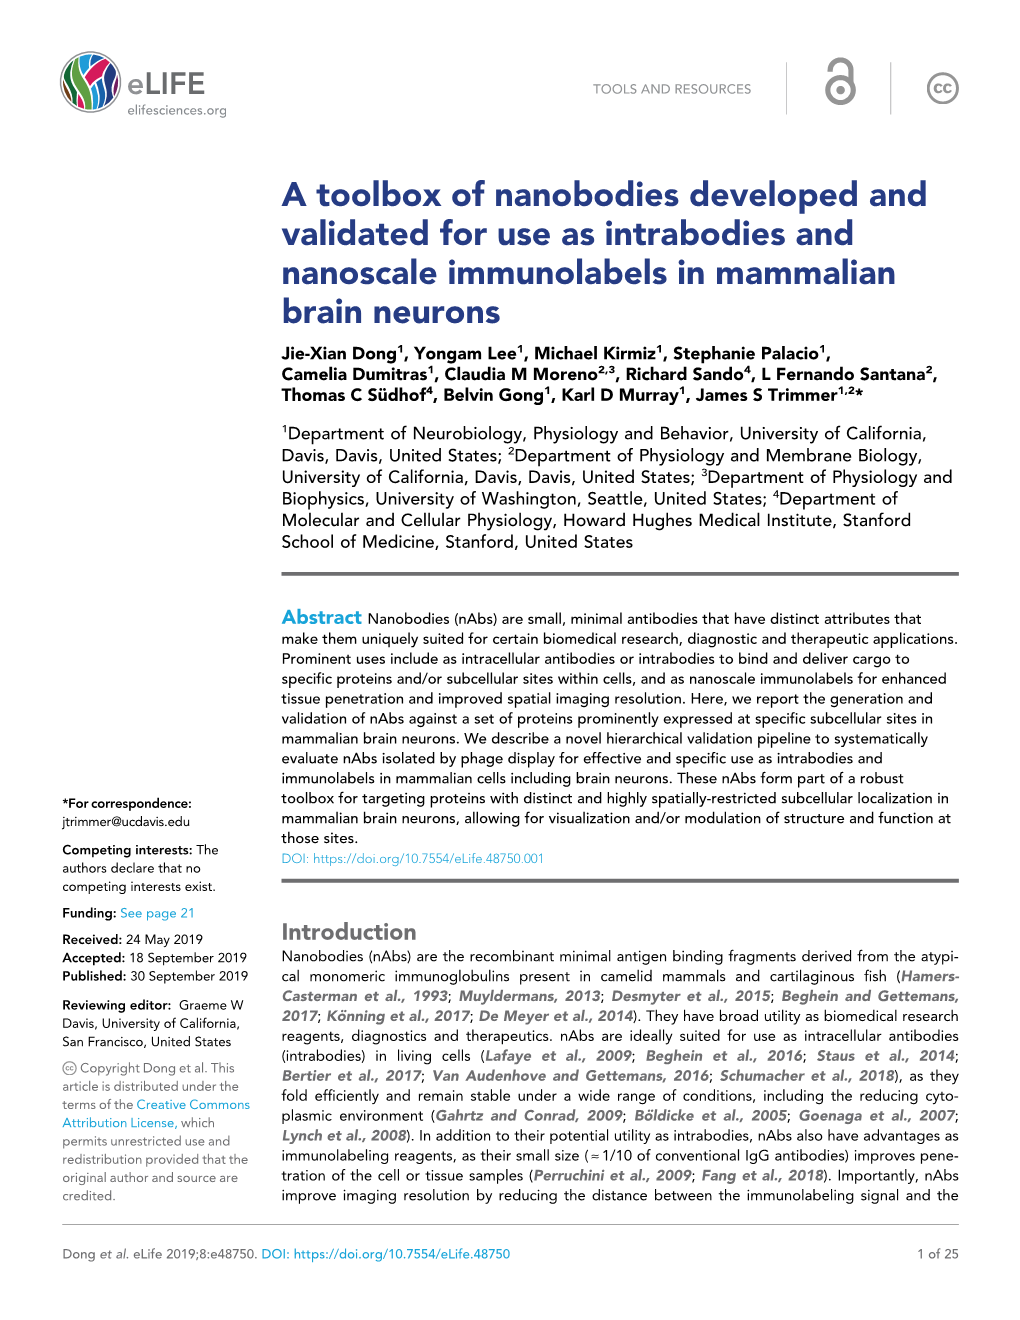 A Toolbox of Nanobodies Developed and Validated for Use As Intrabodies